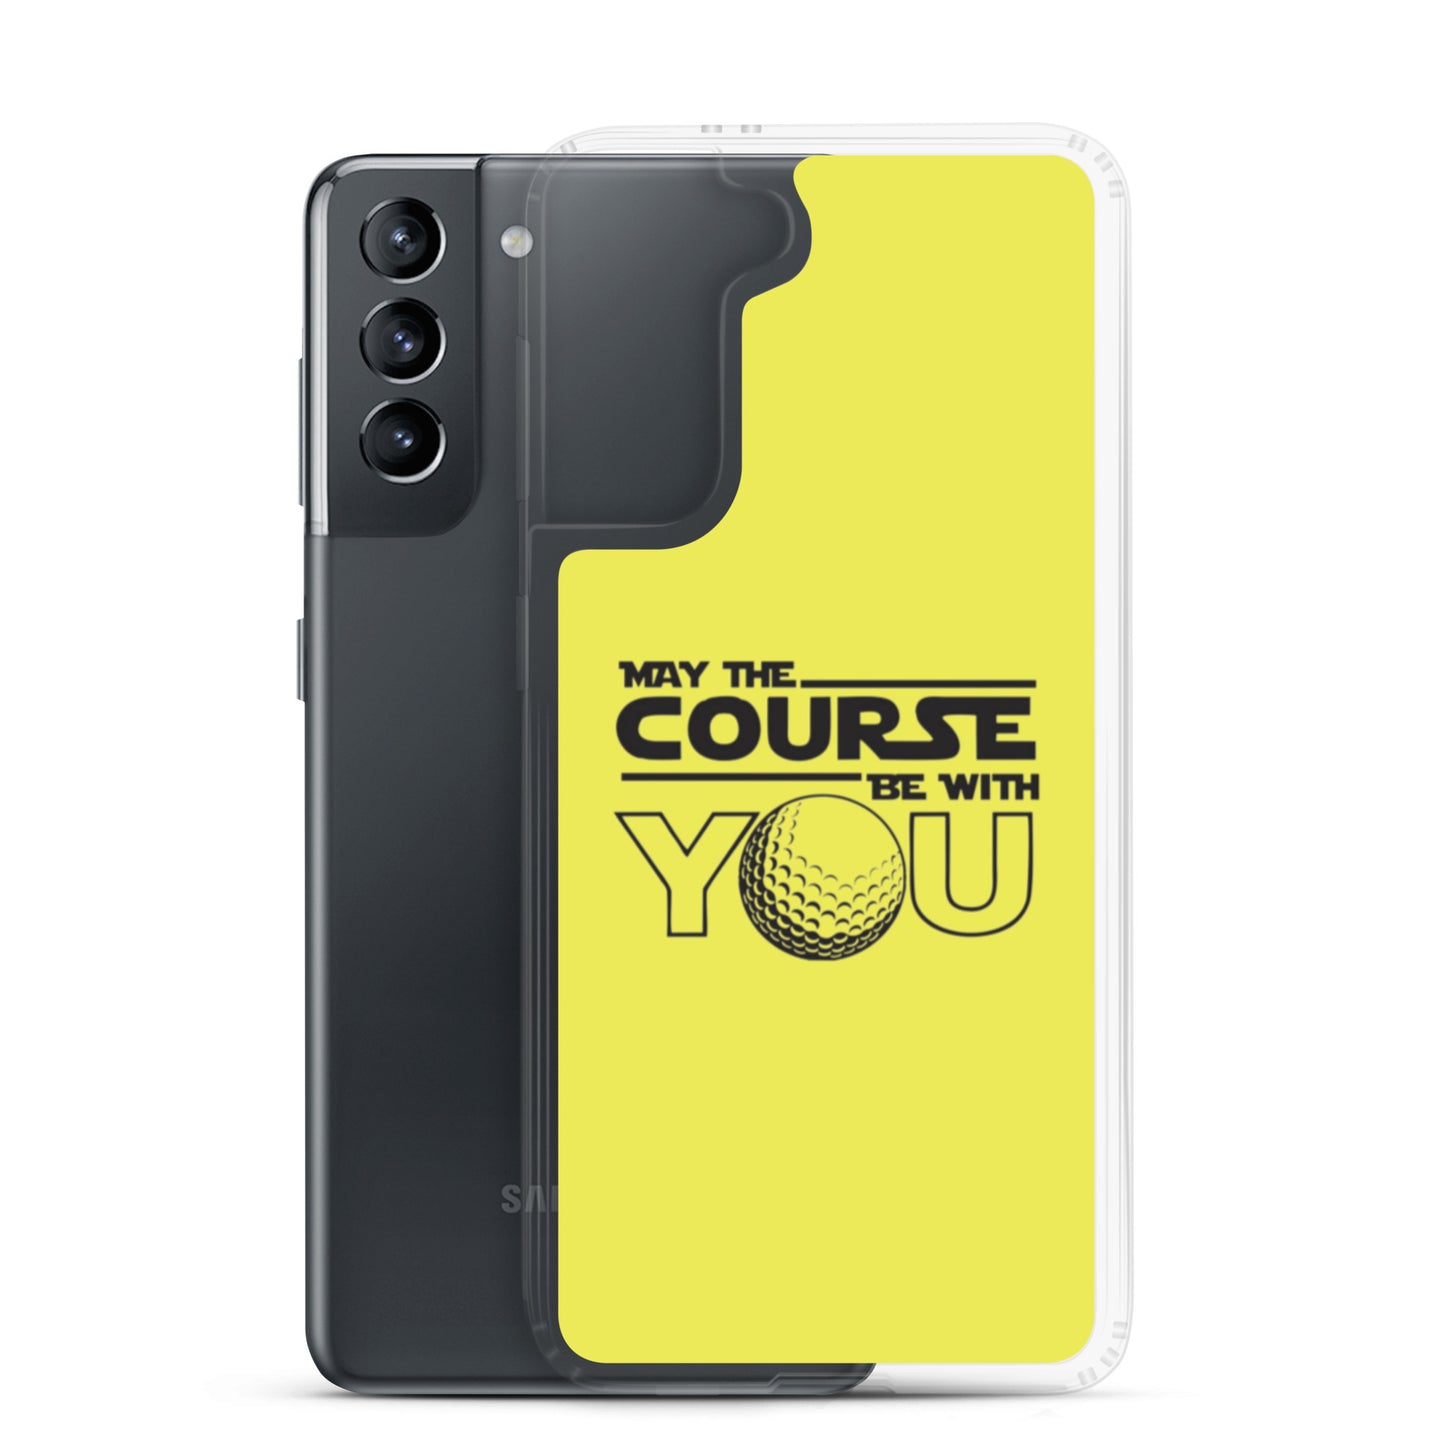 May The Course Be With You Samsung Case